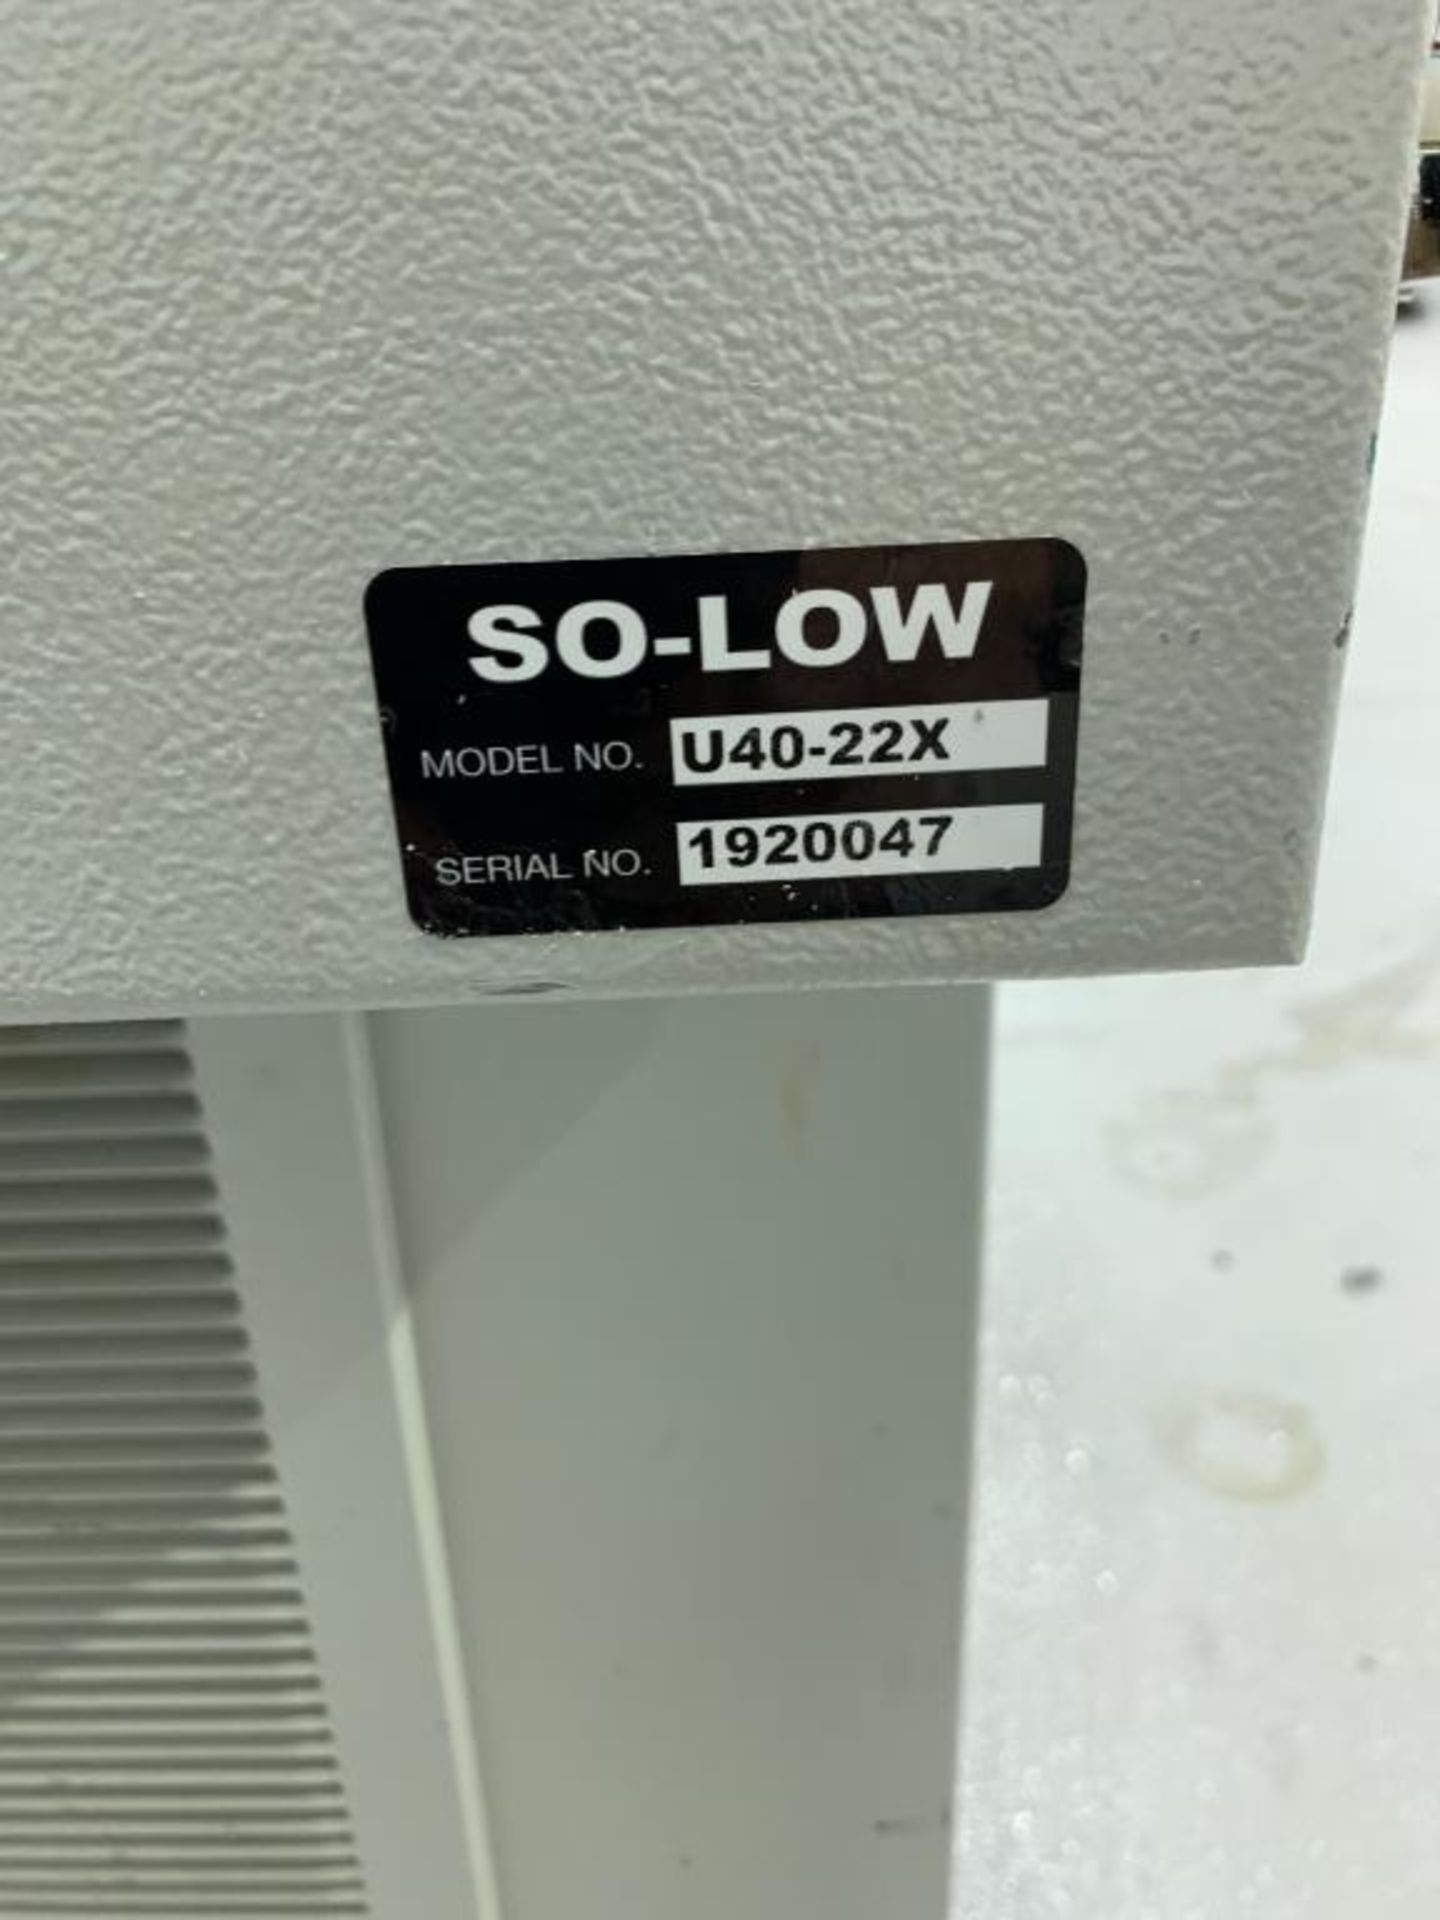 So-Low Ultra Low Upright Freezer, -40 C - Image 7 of 7